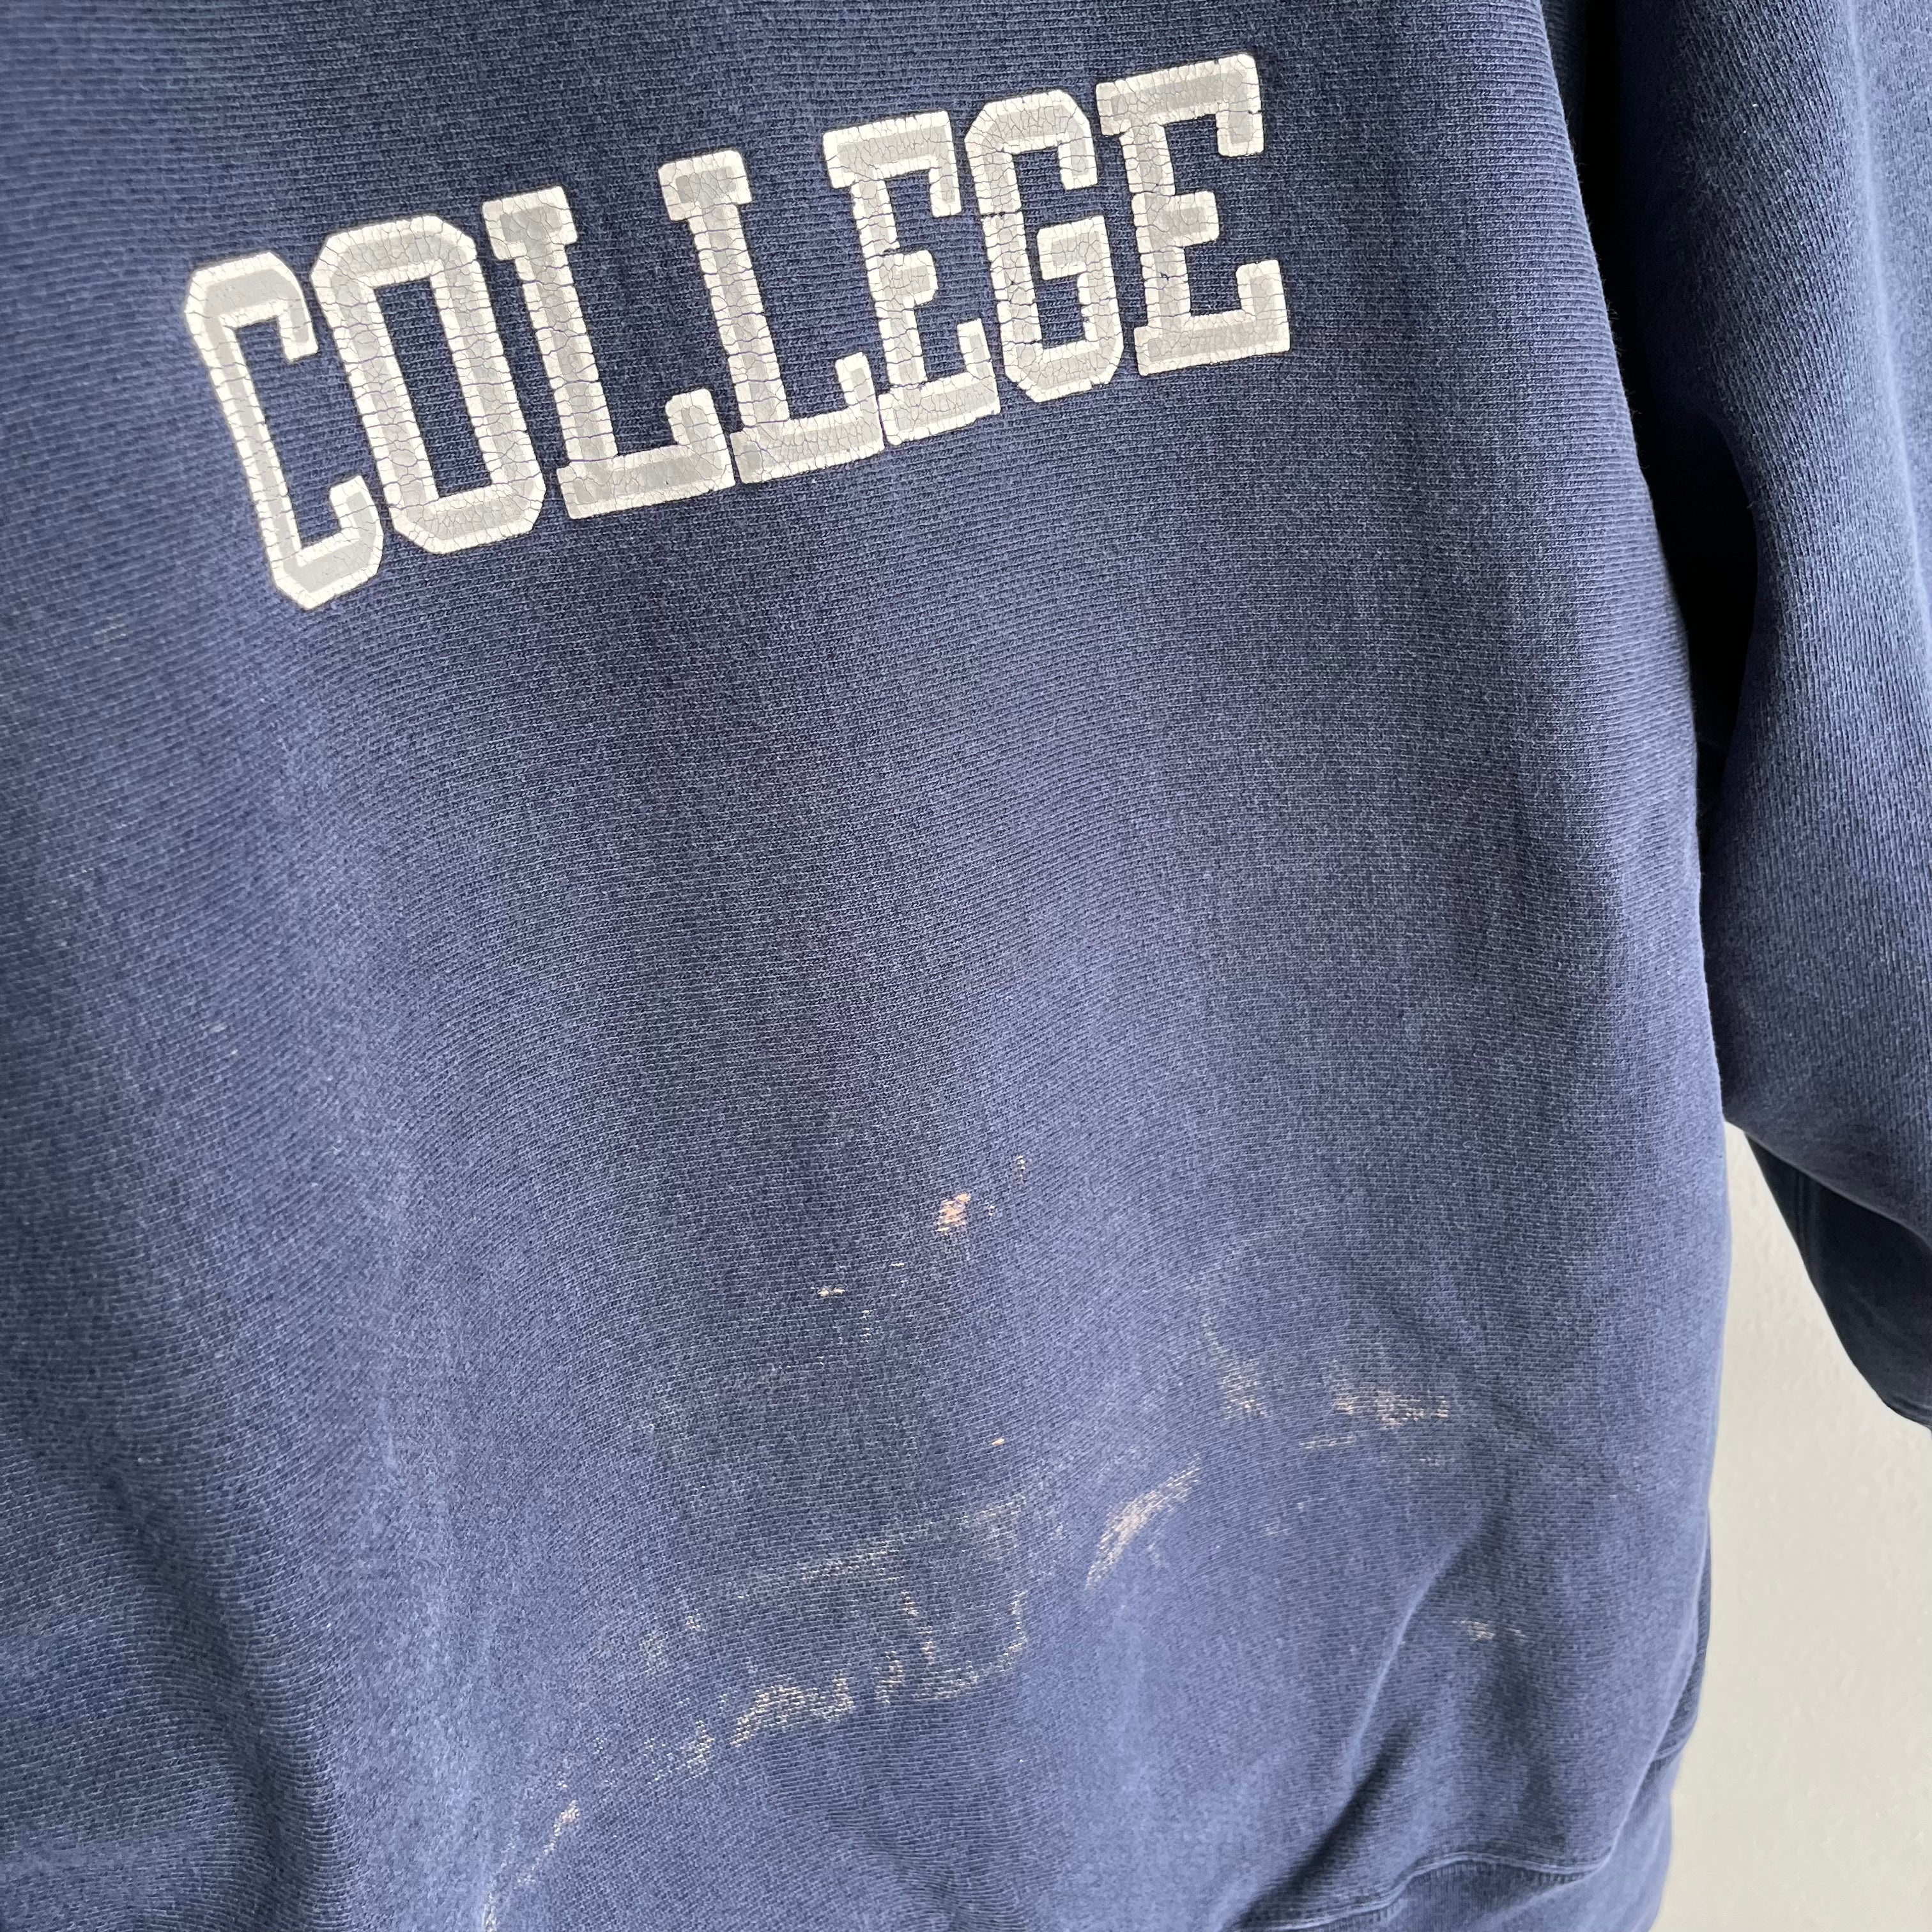 1980/90s Connecticut College Bleach Stained Reverse Weave/Cut Neck